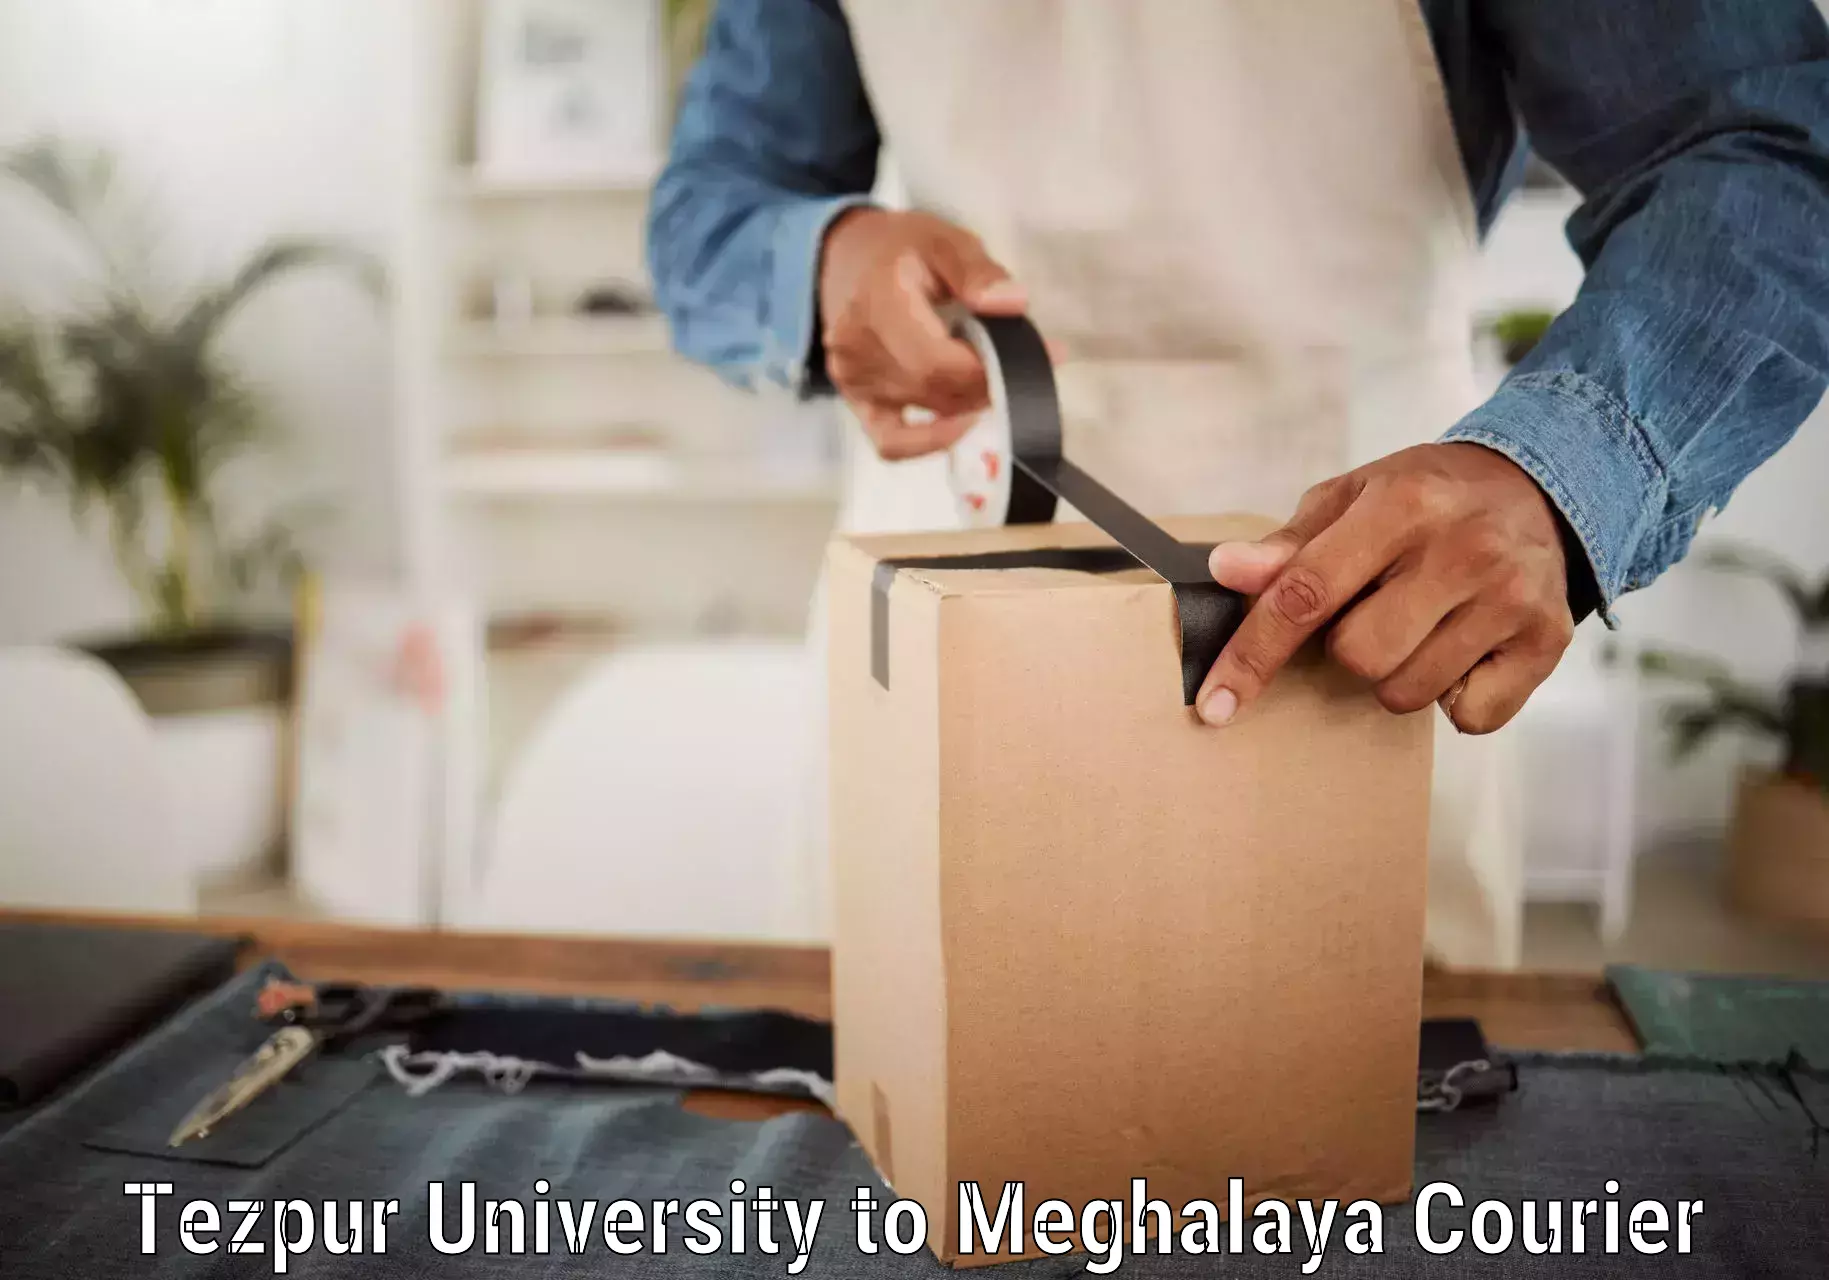 Professional courier services in Tezpur University to East Khasi Hills